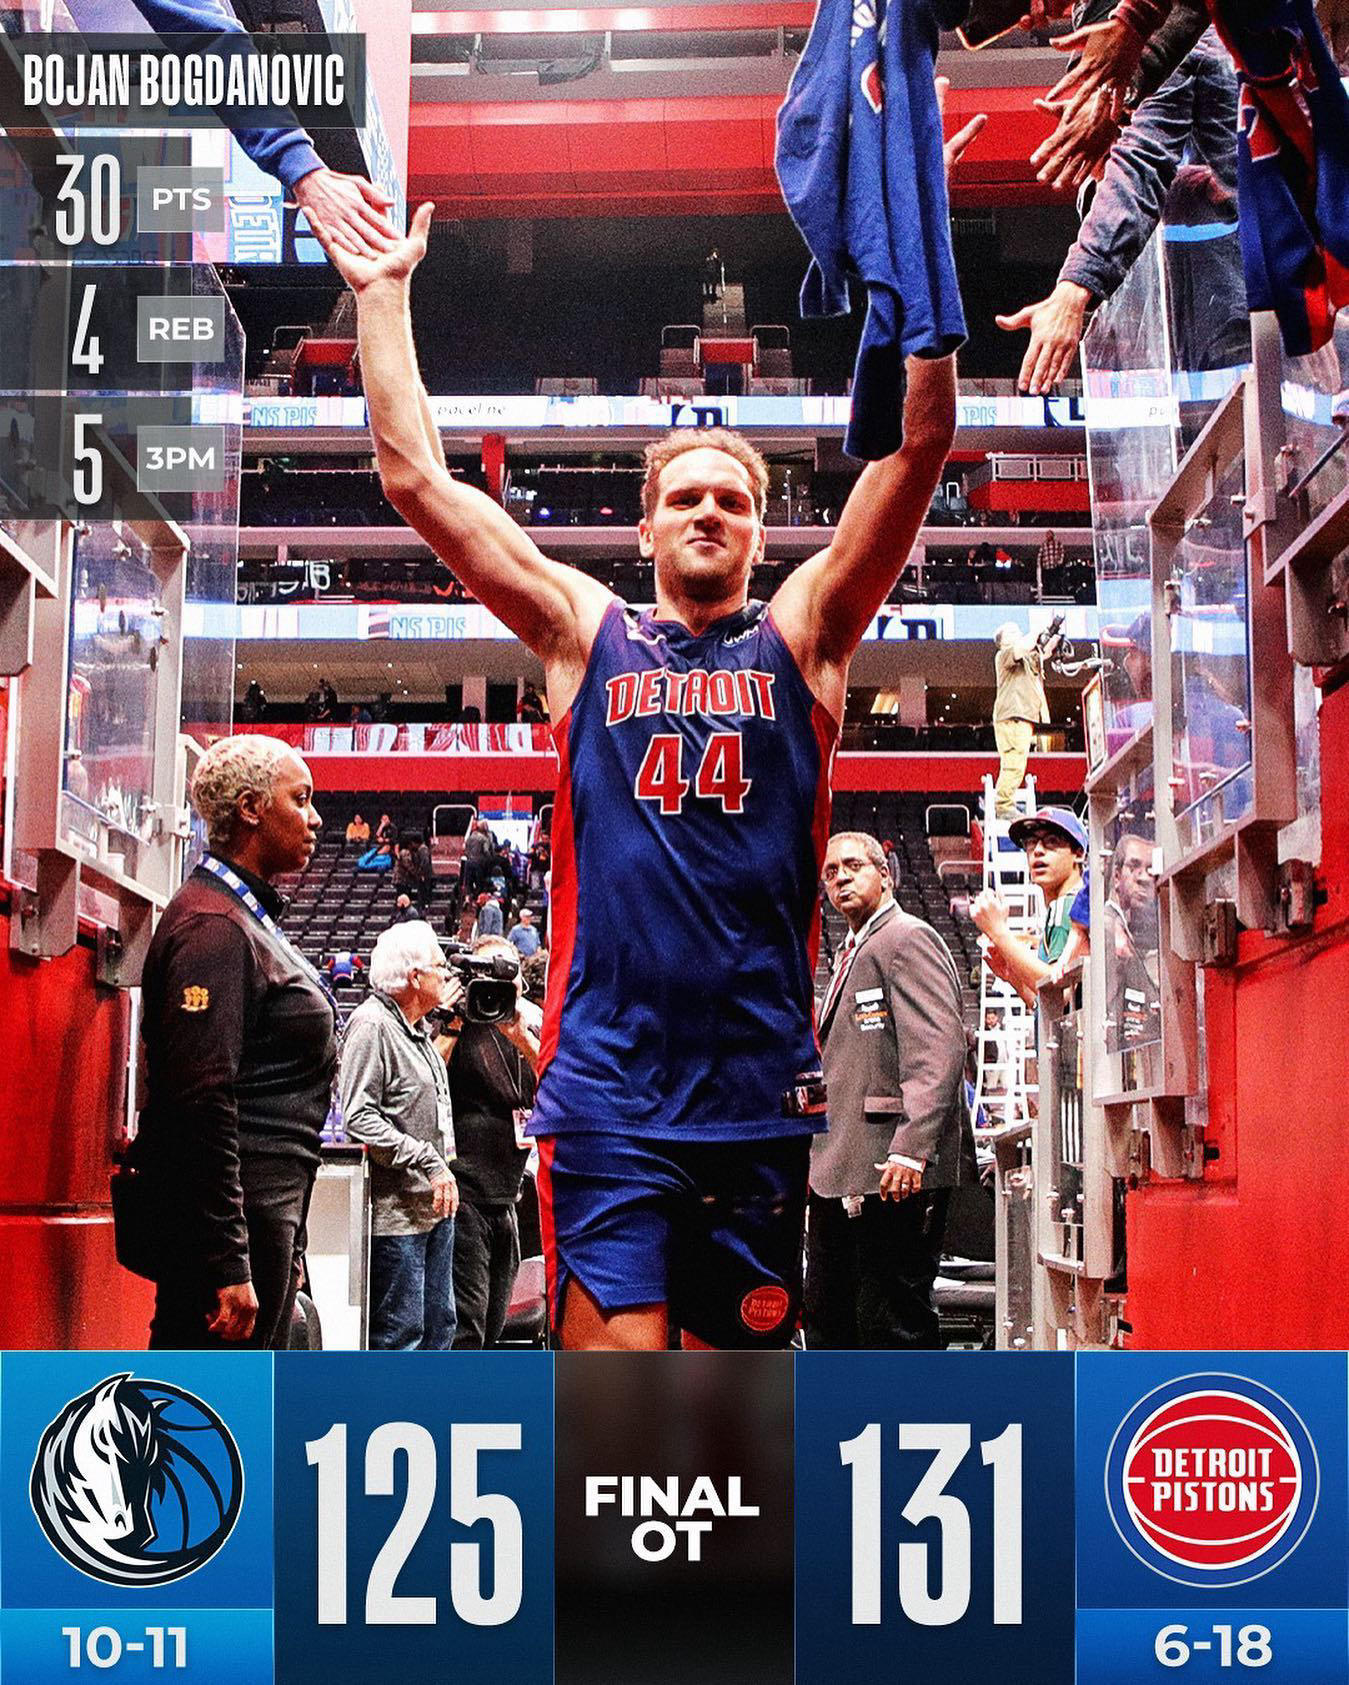 NBA - The #detroitpistons win in OT in tonight’s lone action